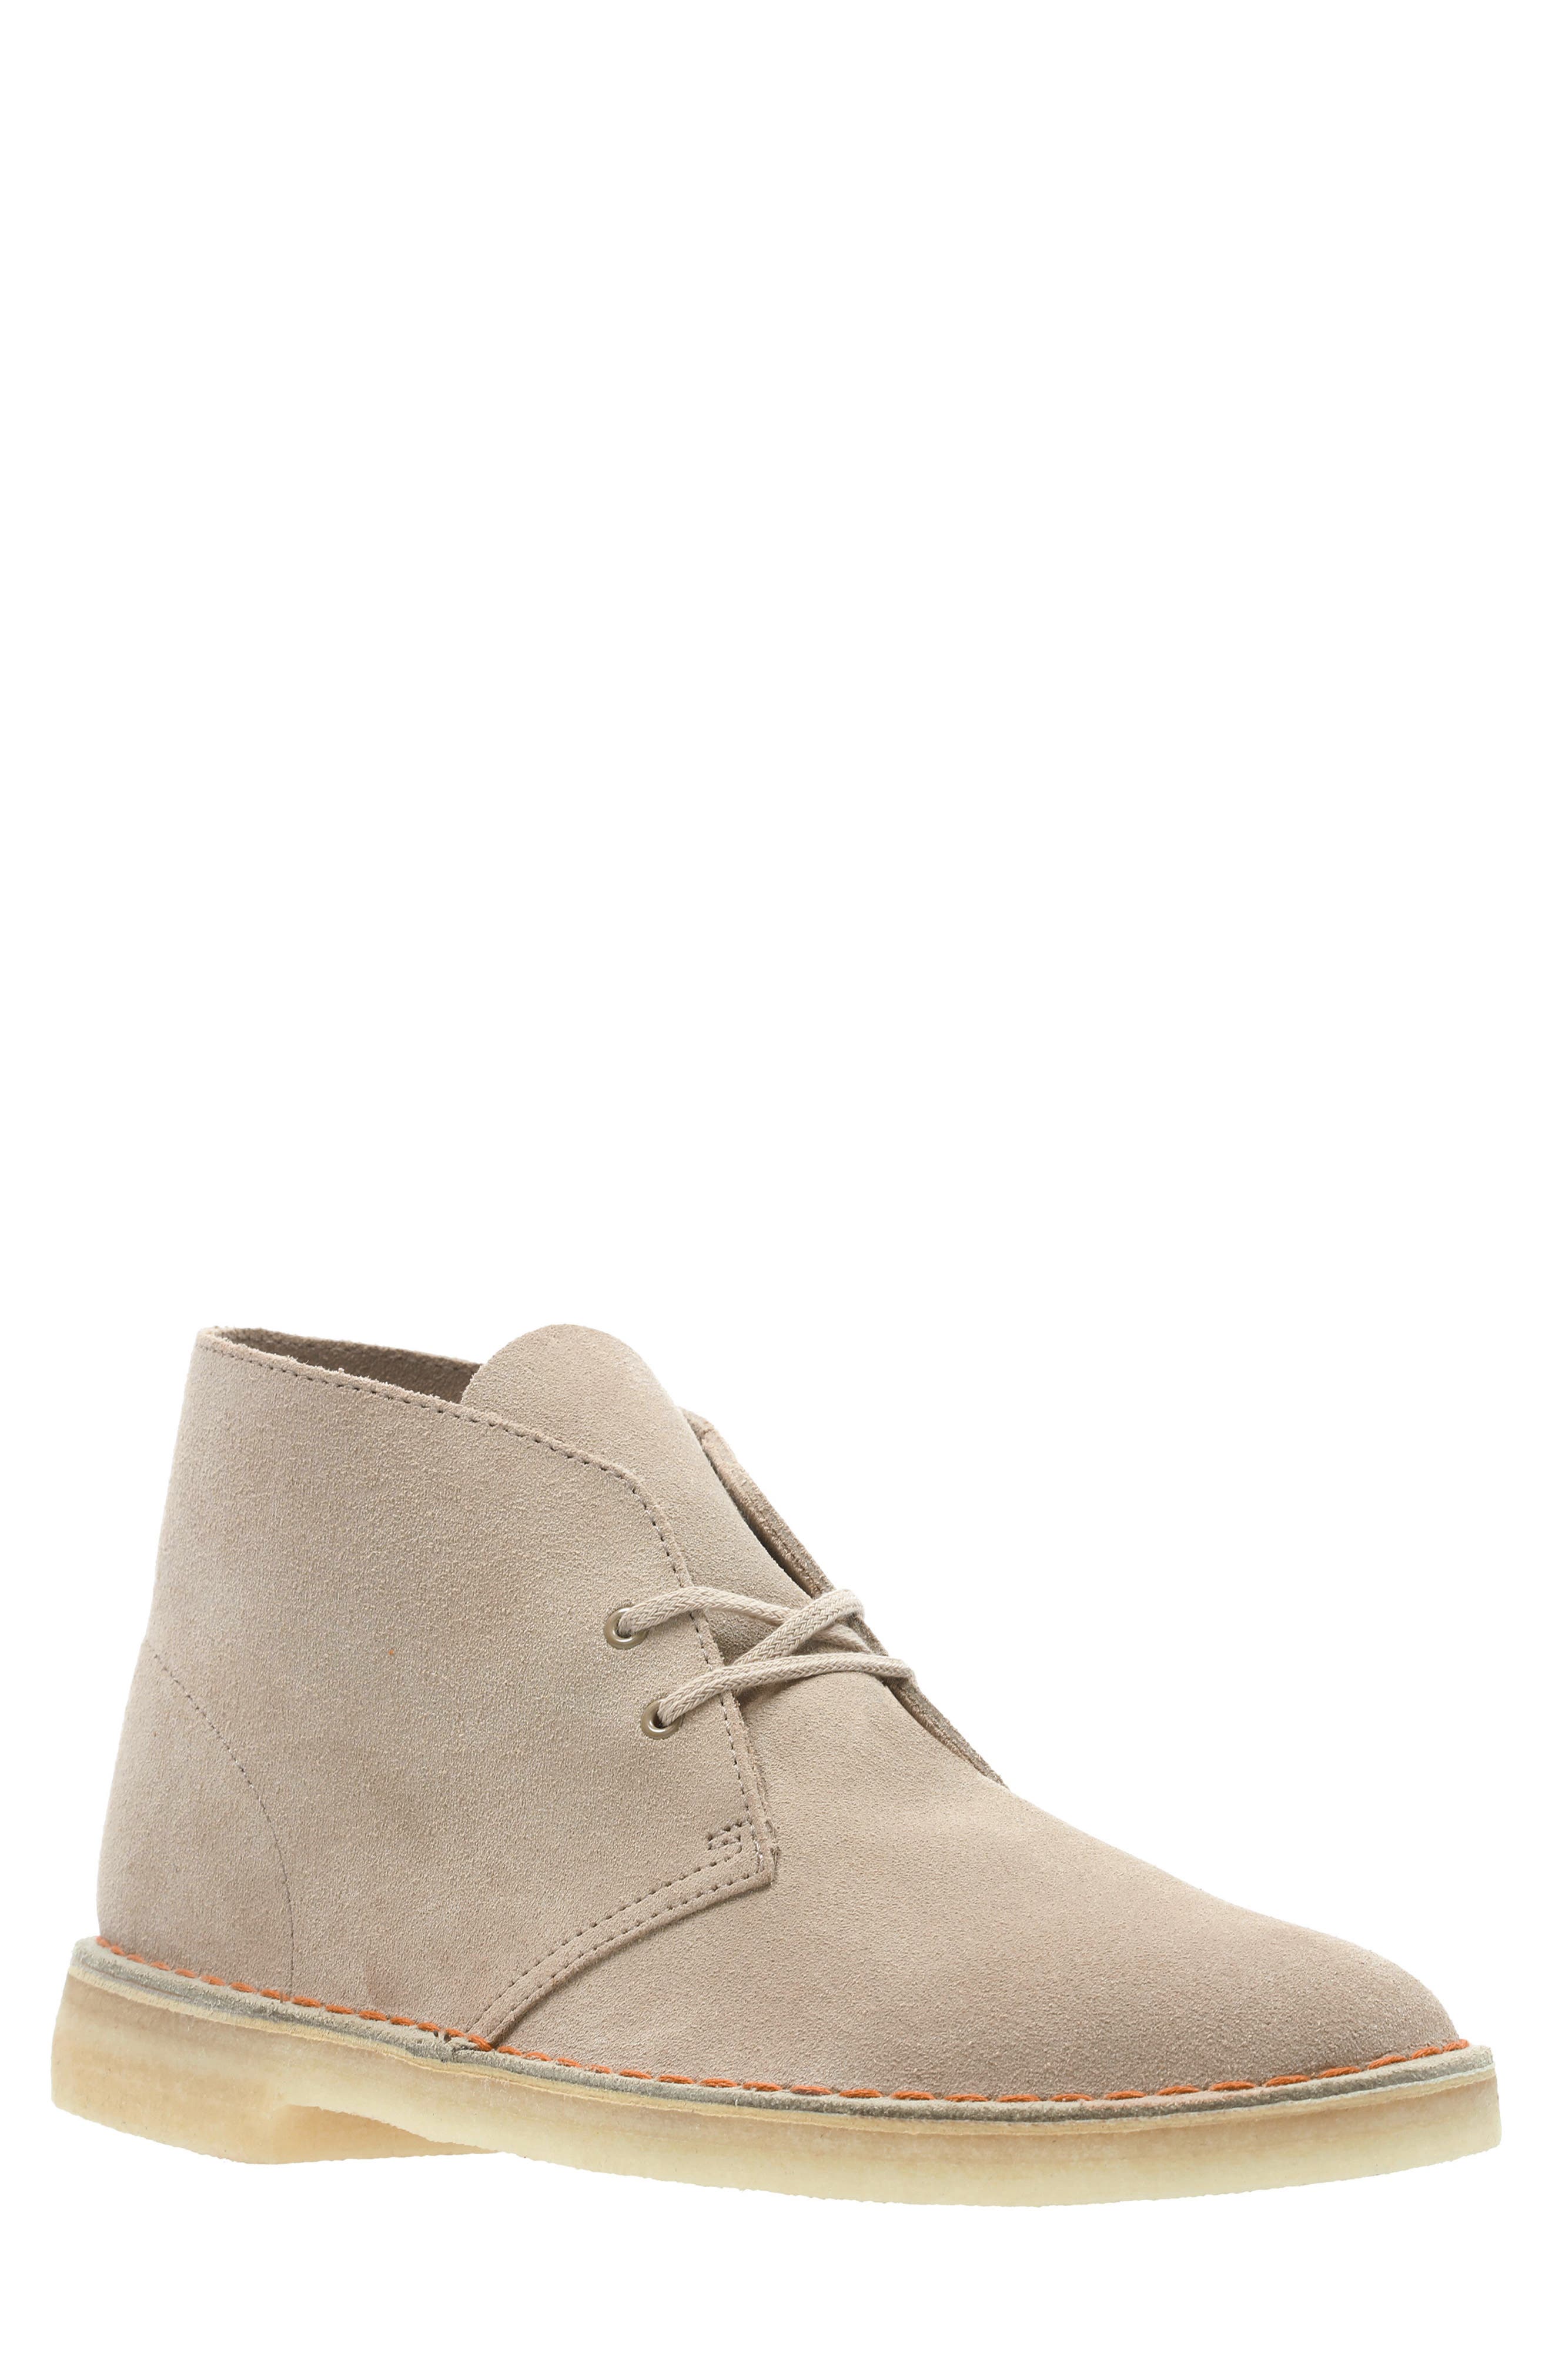 for Men Clarks Originals Desert Boots In Suede in Beige Natural Mens Shoes Boots Chukka boots and desert boots 